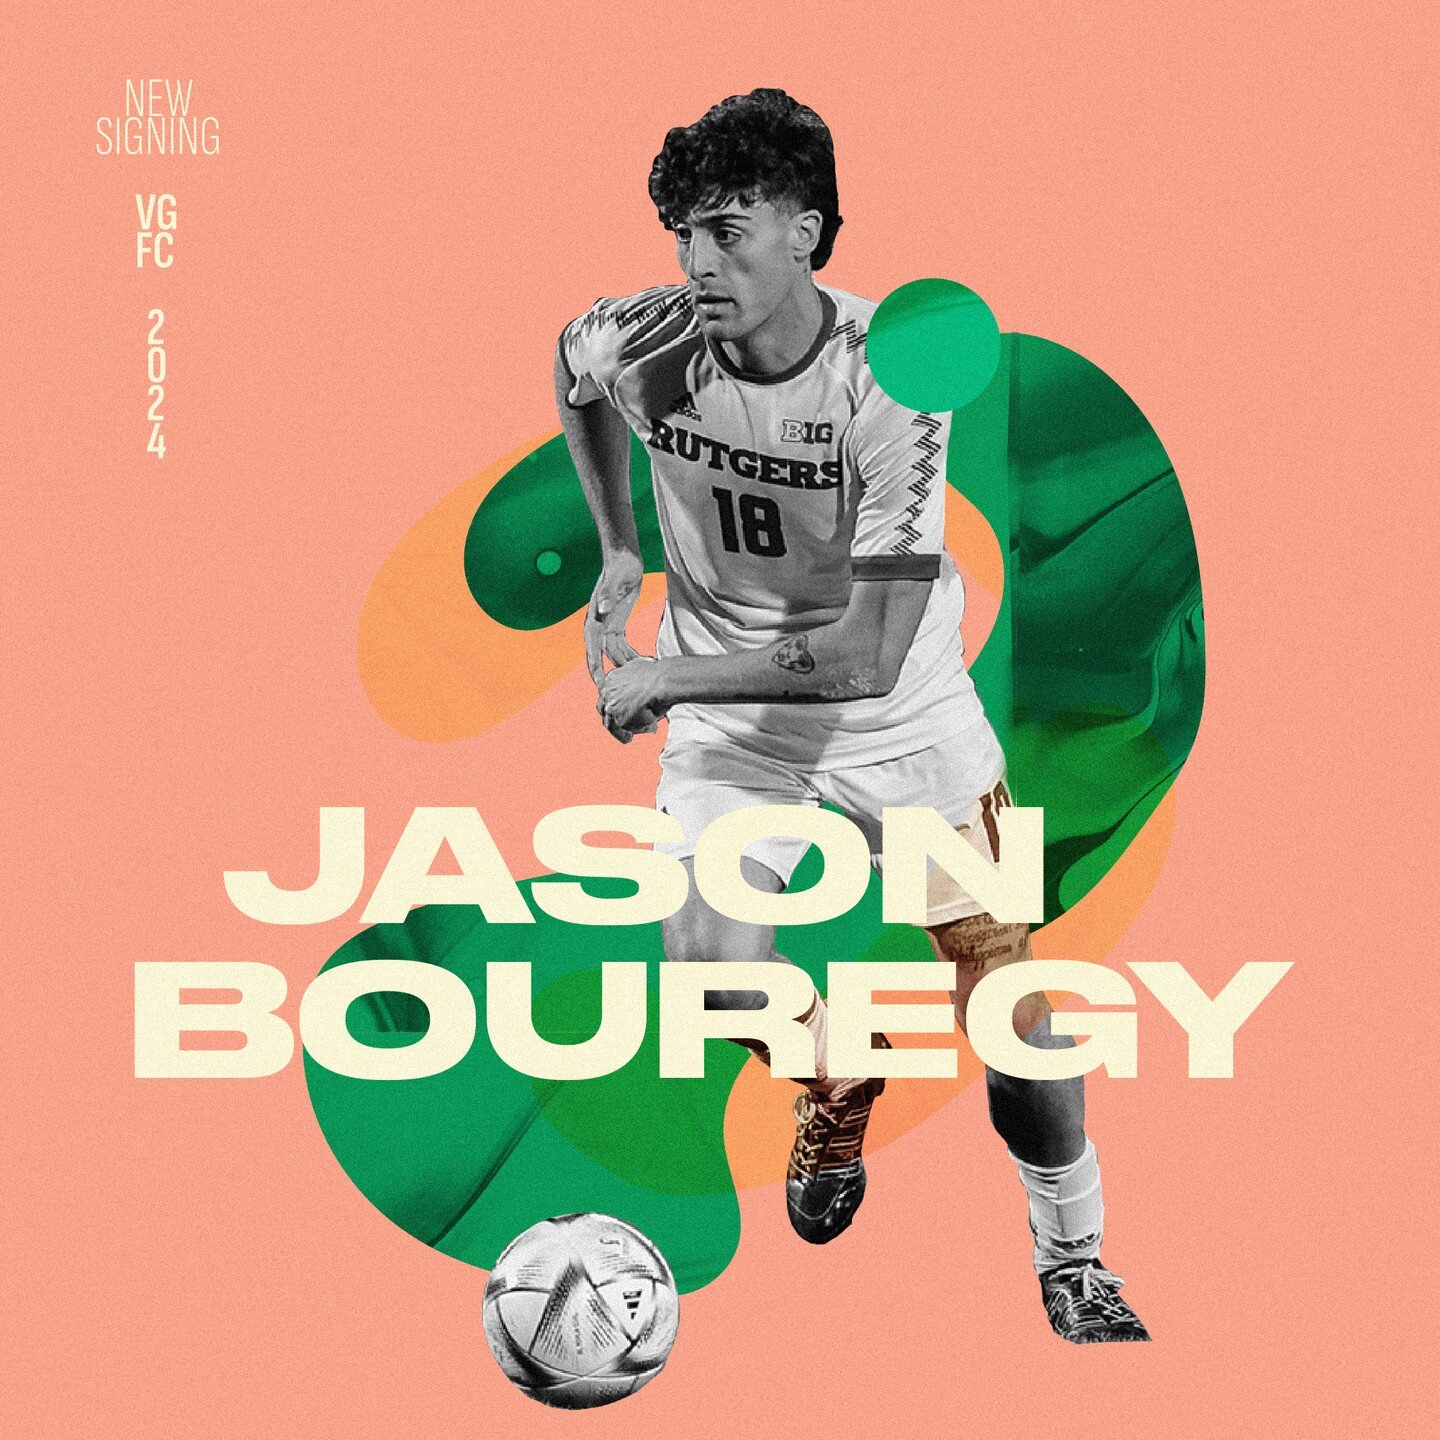 Ok, getting back on track with player announcements. Welcome to the club, @jason_bouregy! #UpTheGreen #VGFC